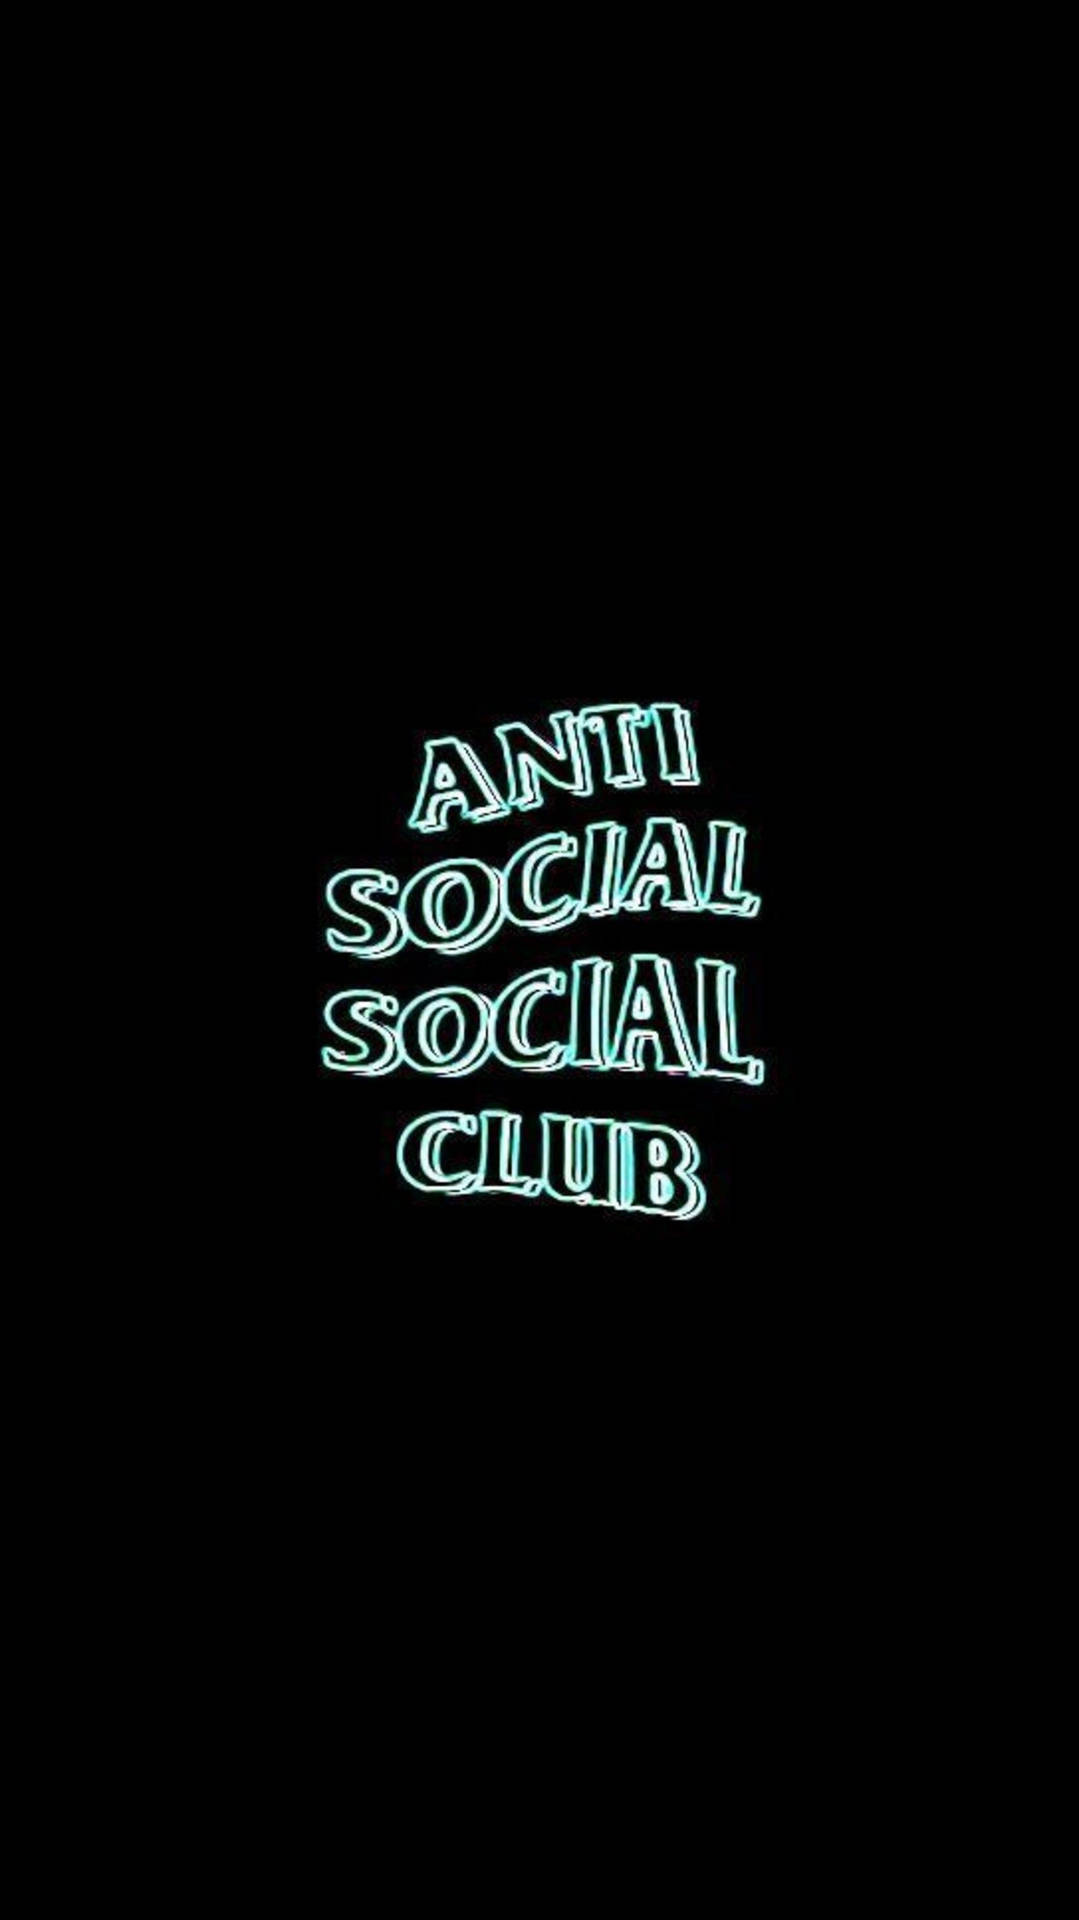 Anti Social Social Club Logo With Contrasting Black And White Colors Background